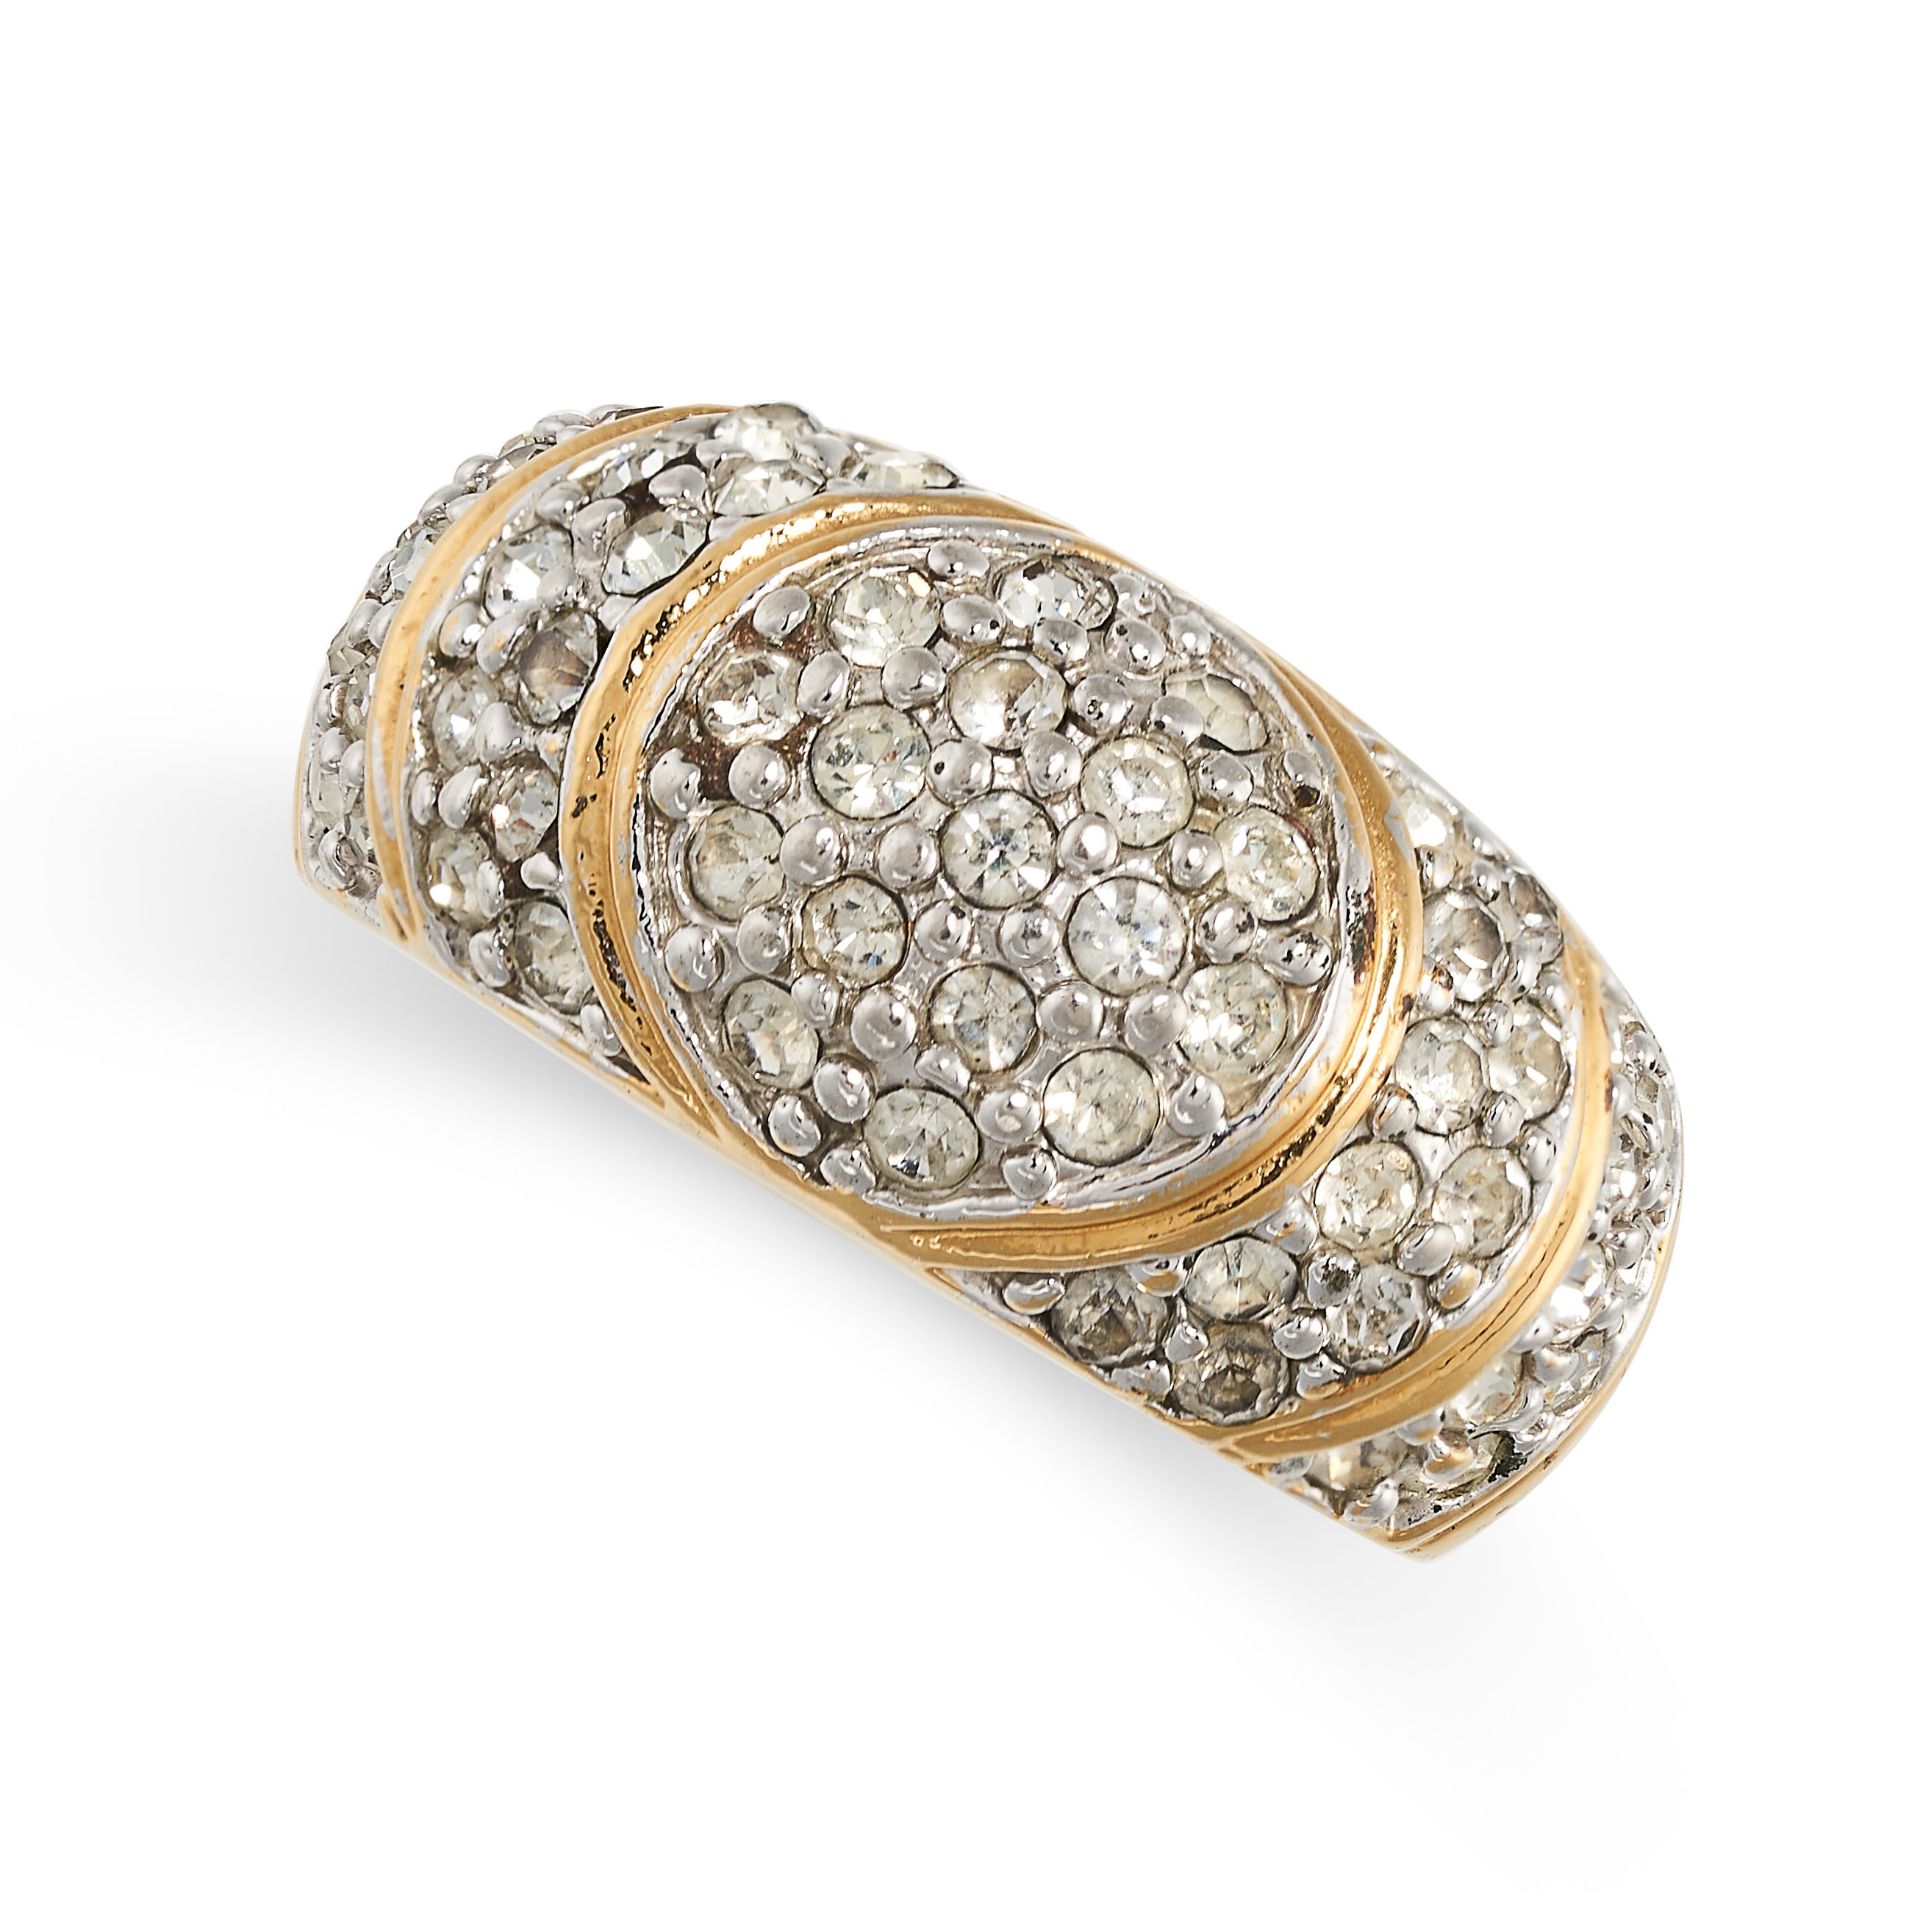 NO RESERVE - A VINTAGE WHITE GEMSTONE RING in 14ct gold, the bombe face is pave set with round cut